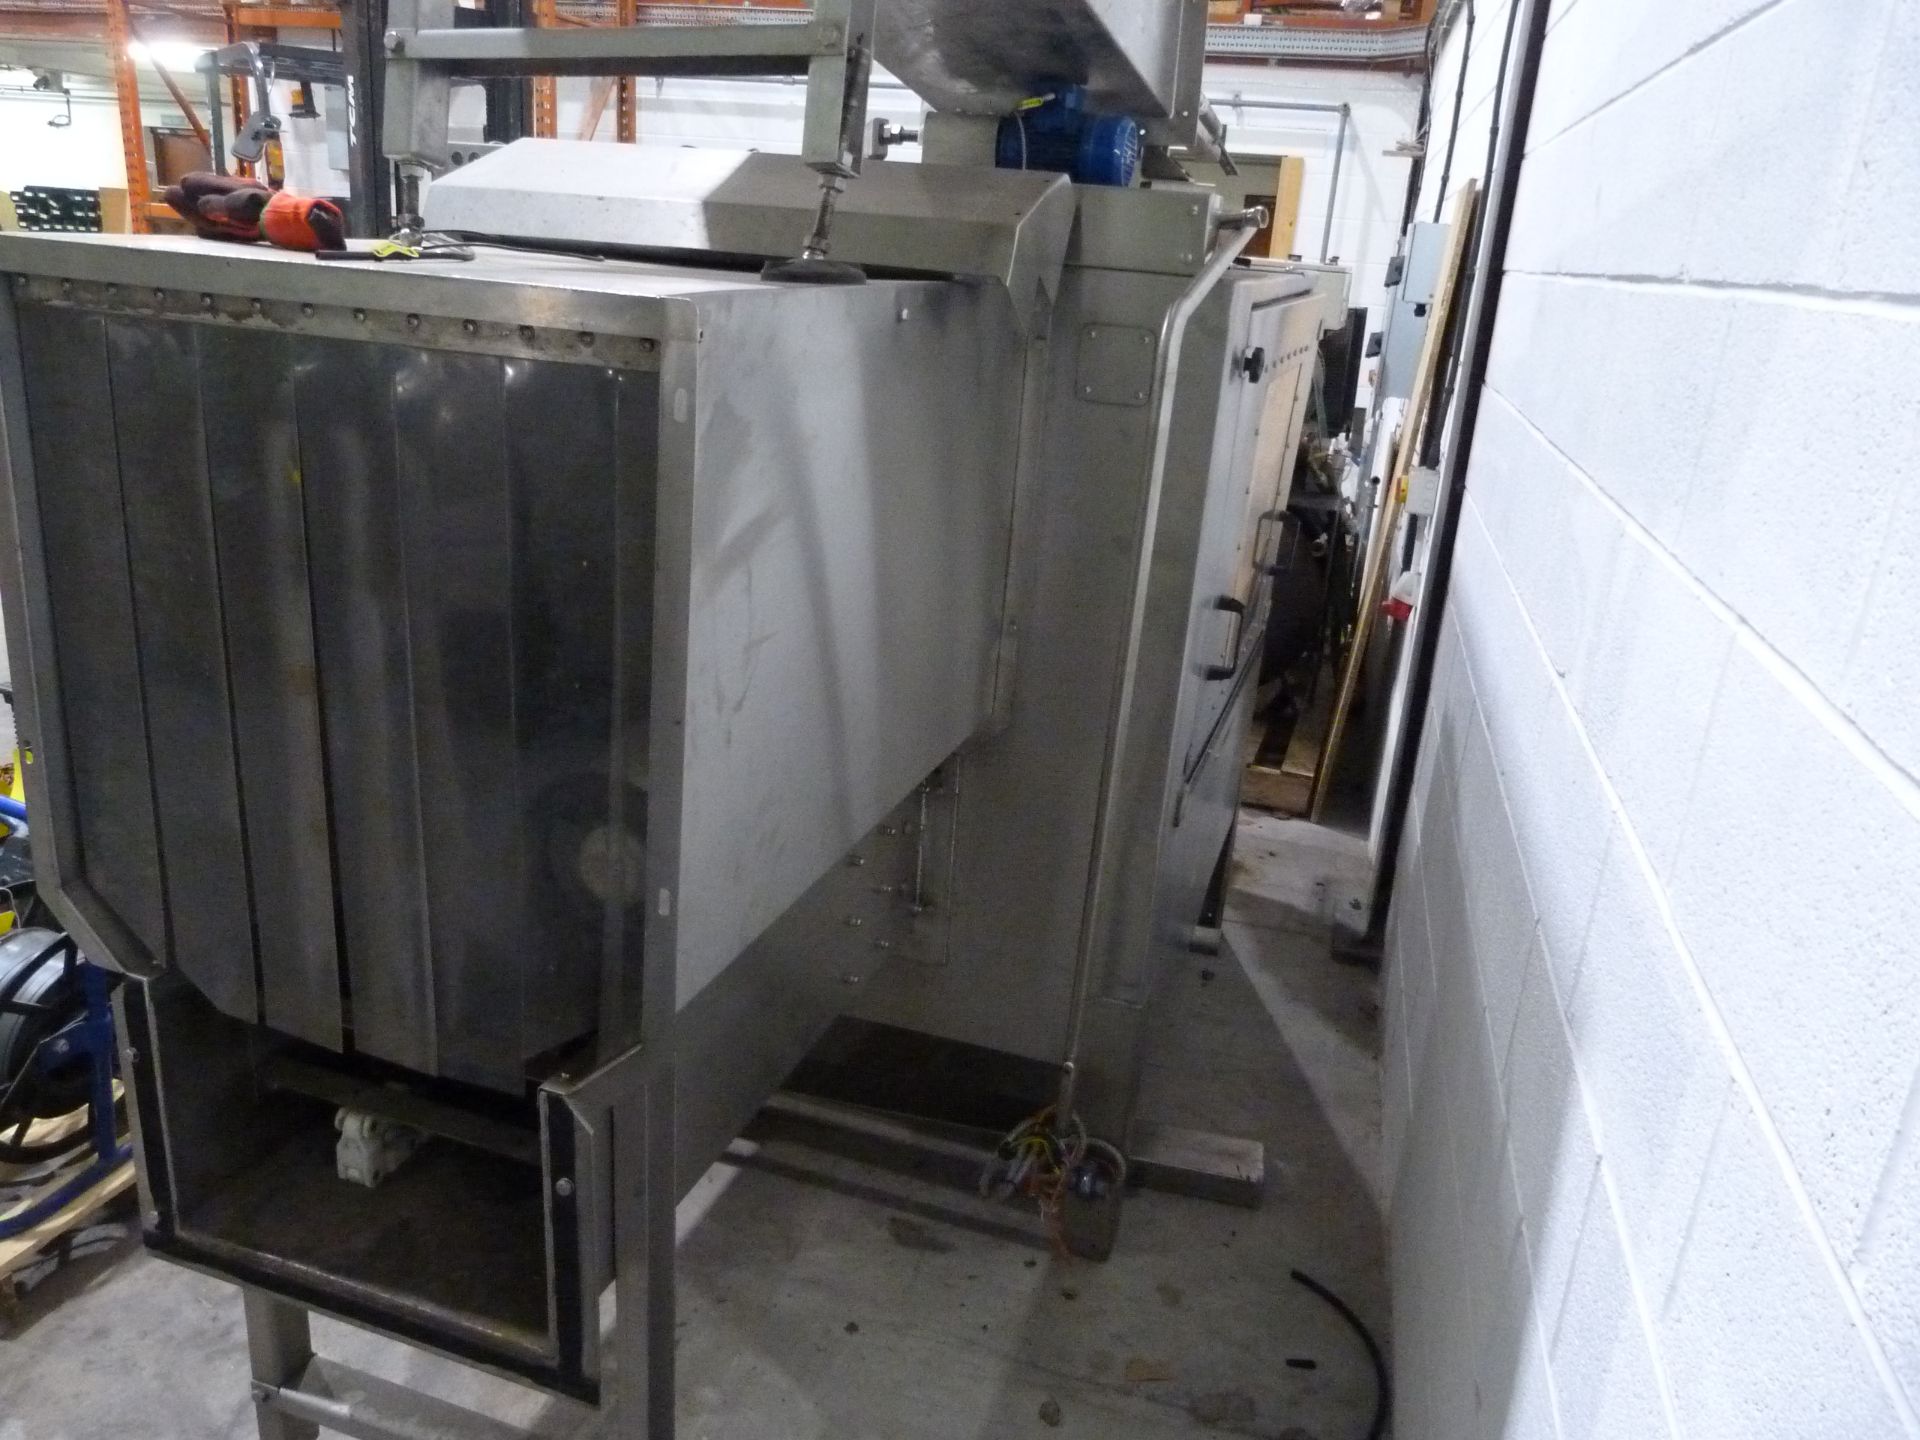 *Stainless Steel External Barrel Cleaner including lot 90 *External Case Washer Control Panel Stainl - Image 3 of 3